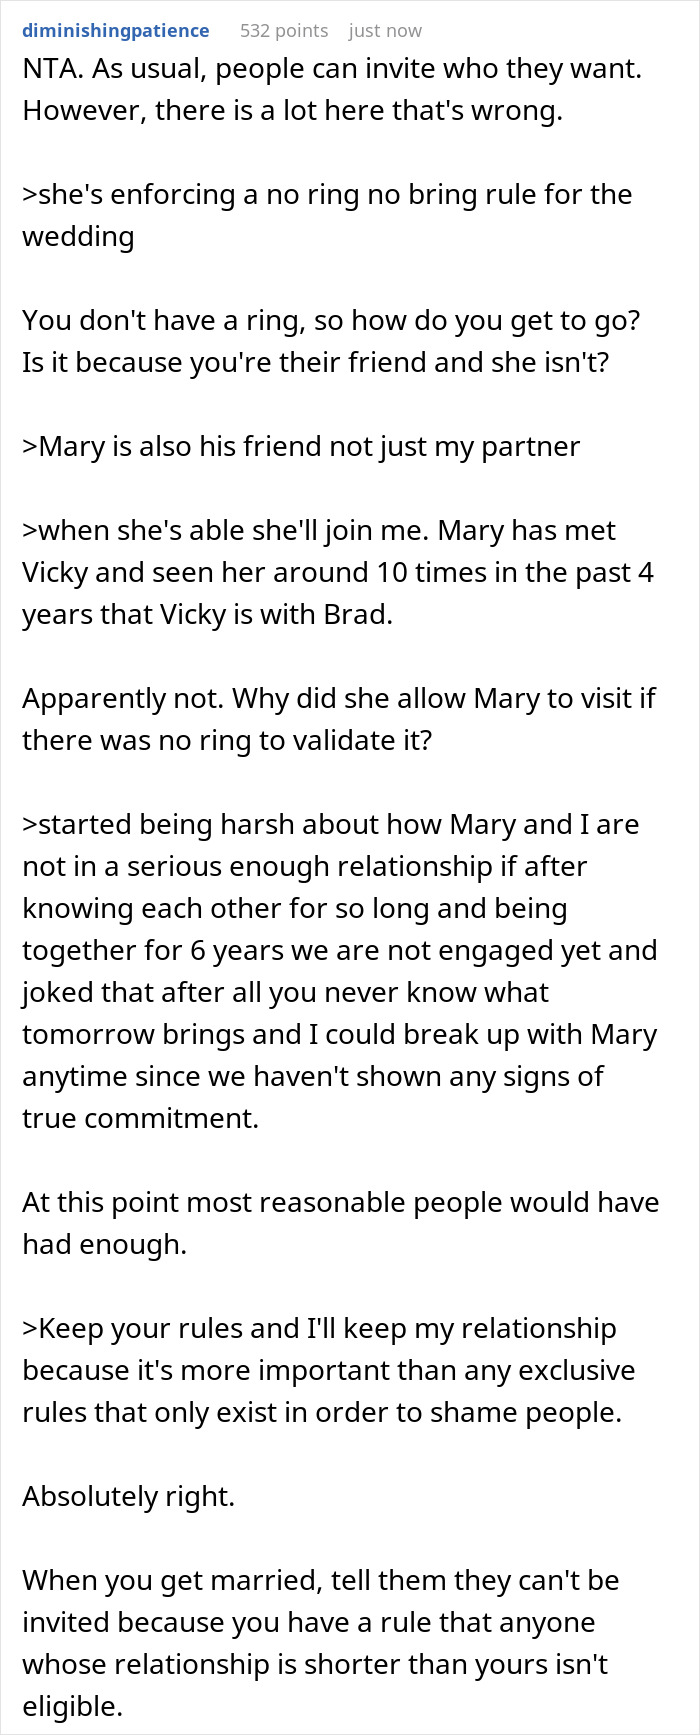 Man Rebels Against Friend's "No Ring No Bring" Wedding Rule After His Girlfriend Of 6 Years Isn't Invited